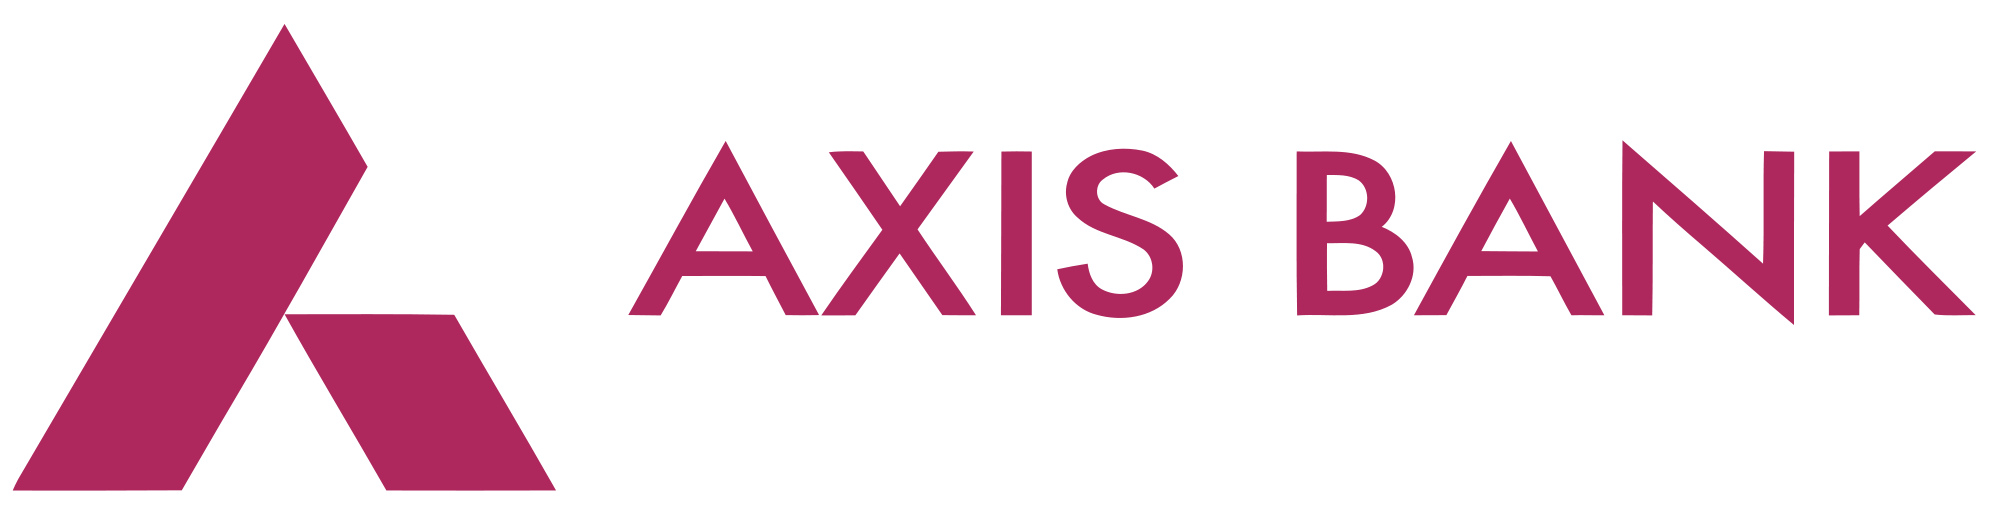 Deep Analysis Of Axis Bank Share Price And TradingView